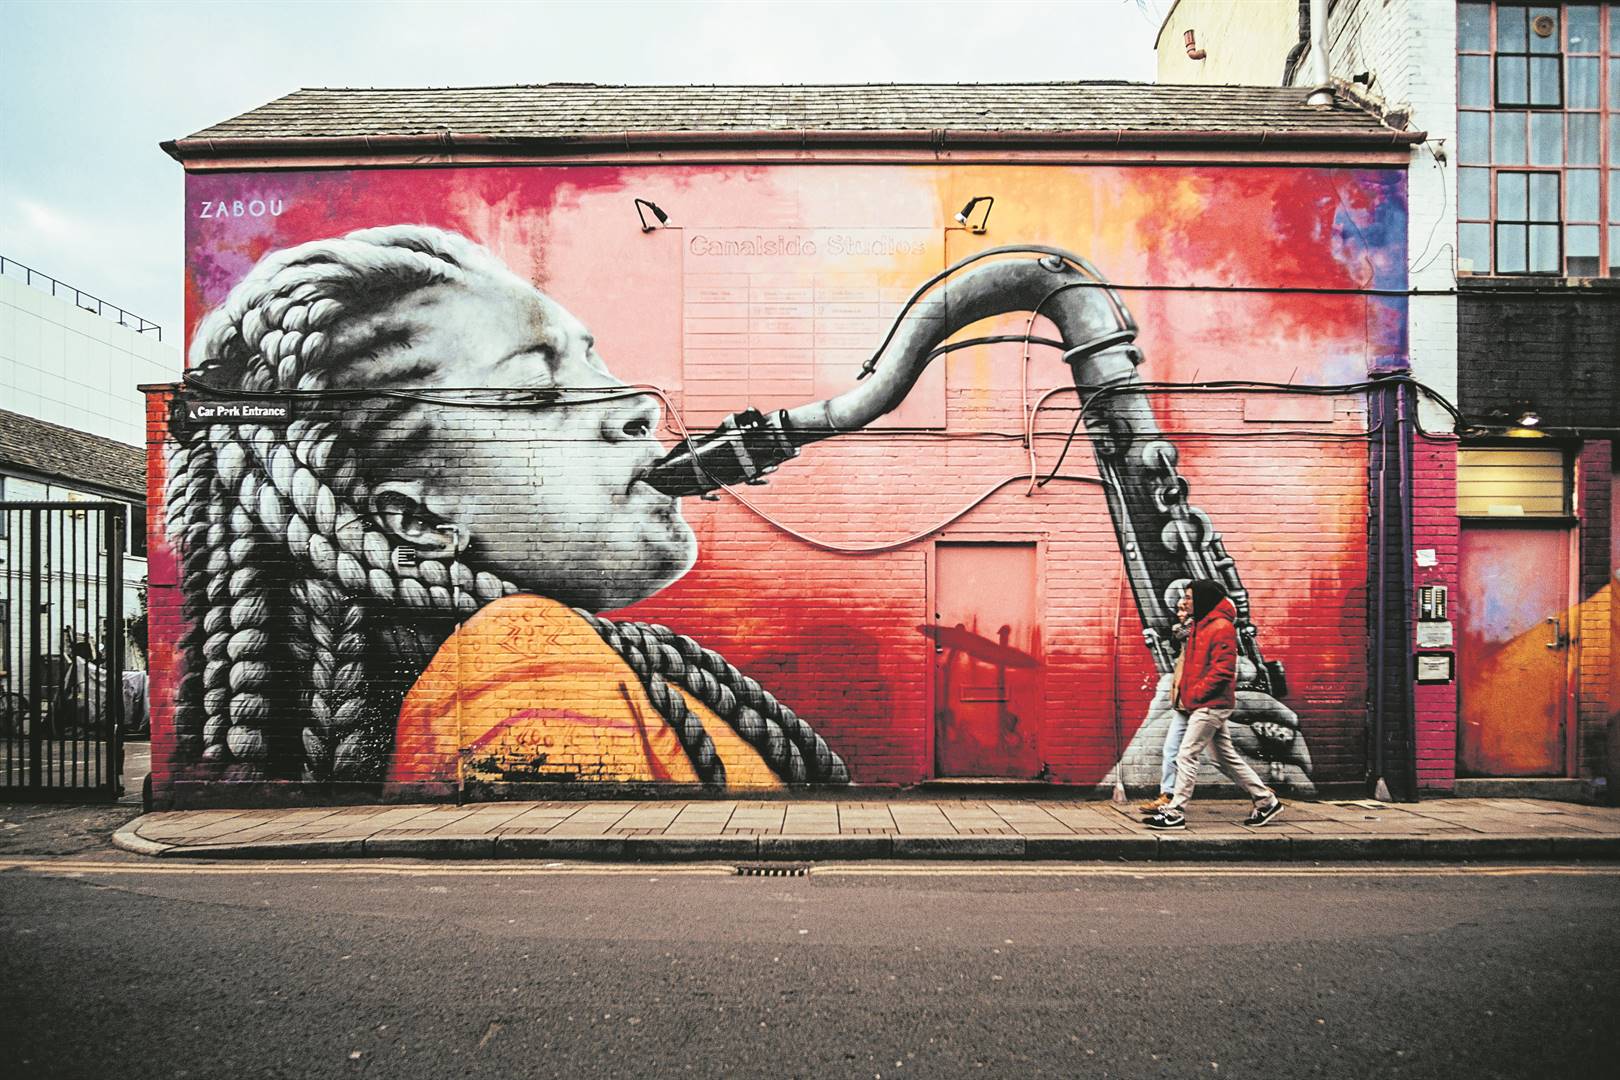 Muralists and graffiti artists can apply to produce a public mural that responds to the 30th anniversary of democracy in South Africa. The location of the mural will be Kimberley. Photo used as illustration.Photo: Unsplash/Samuel Regan Assante